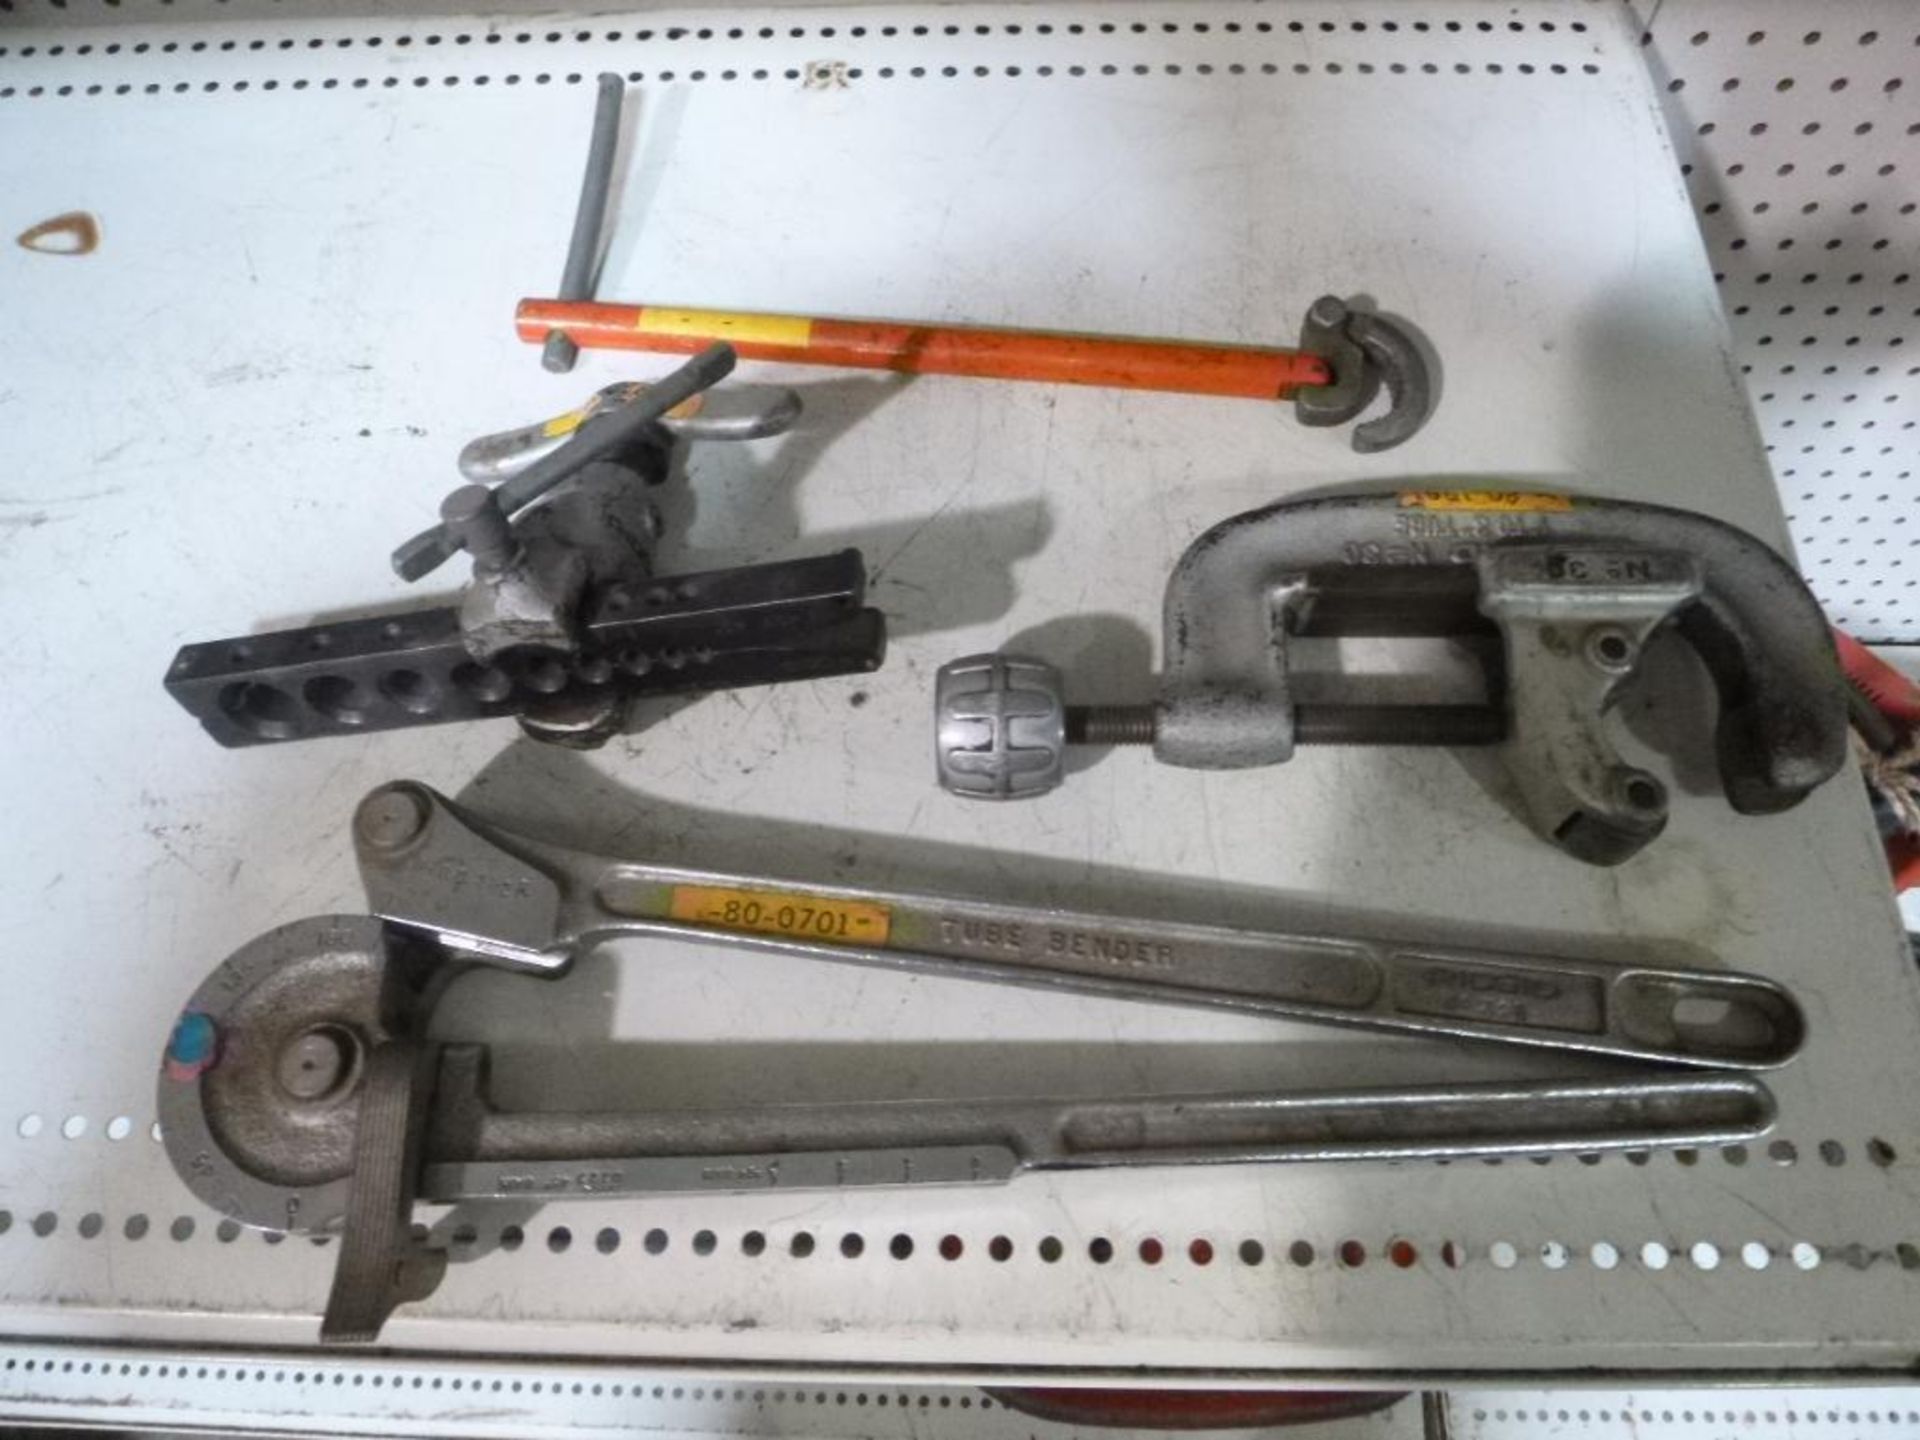 LOT: Flaring Tool, 1/8 - 3/4; Cutter, Tubing 1 in. - 3 in., Ridgid No. 30, Basin Wrench, Flaring Too